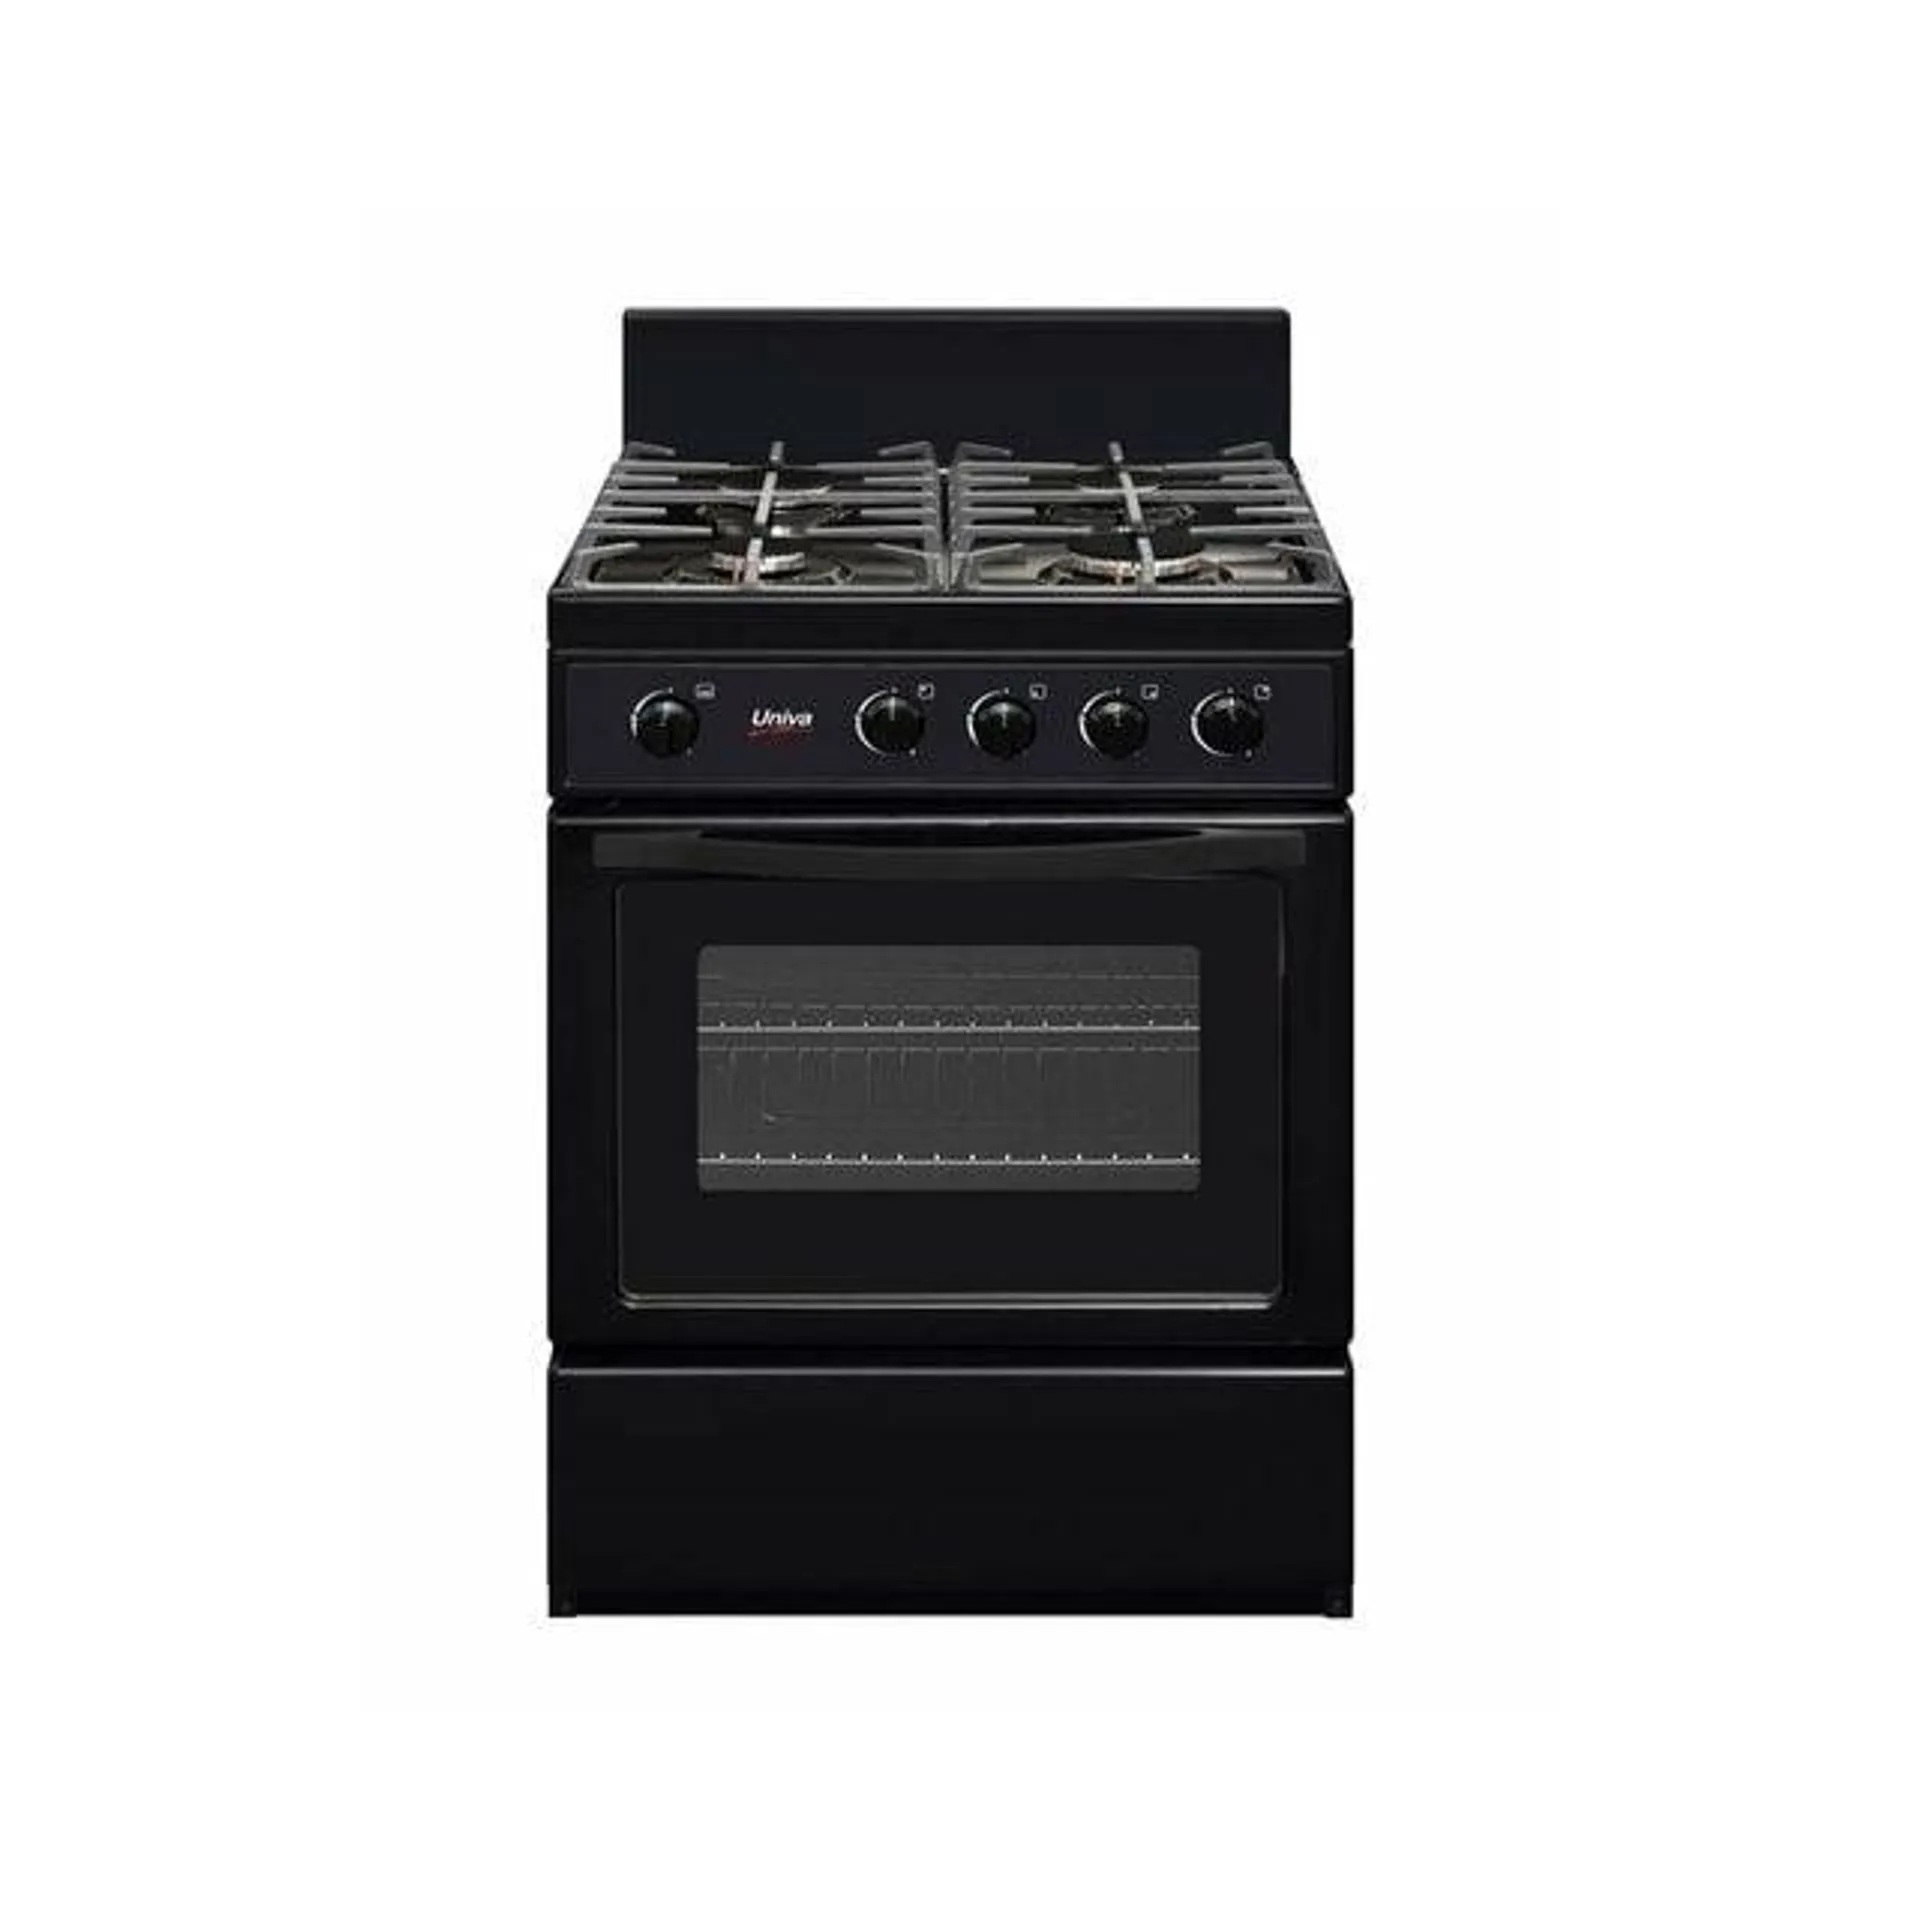 UNIVA 4 BURNER COMPACT FULL GAS STOVE AND OVEN